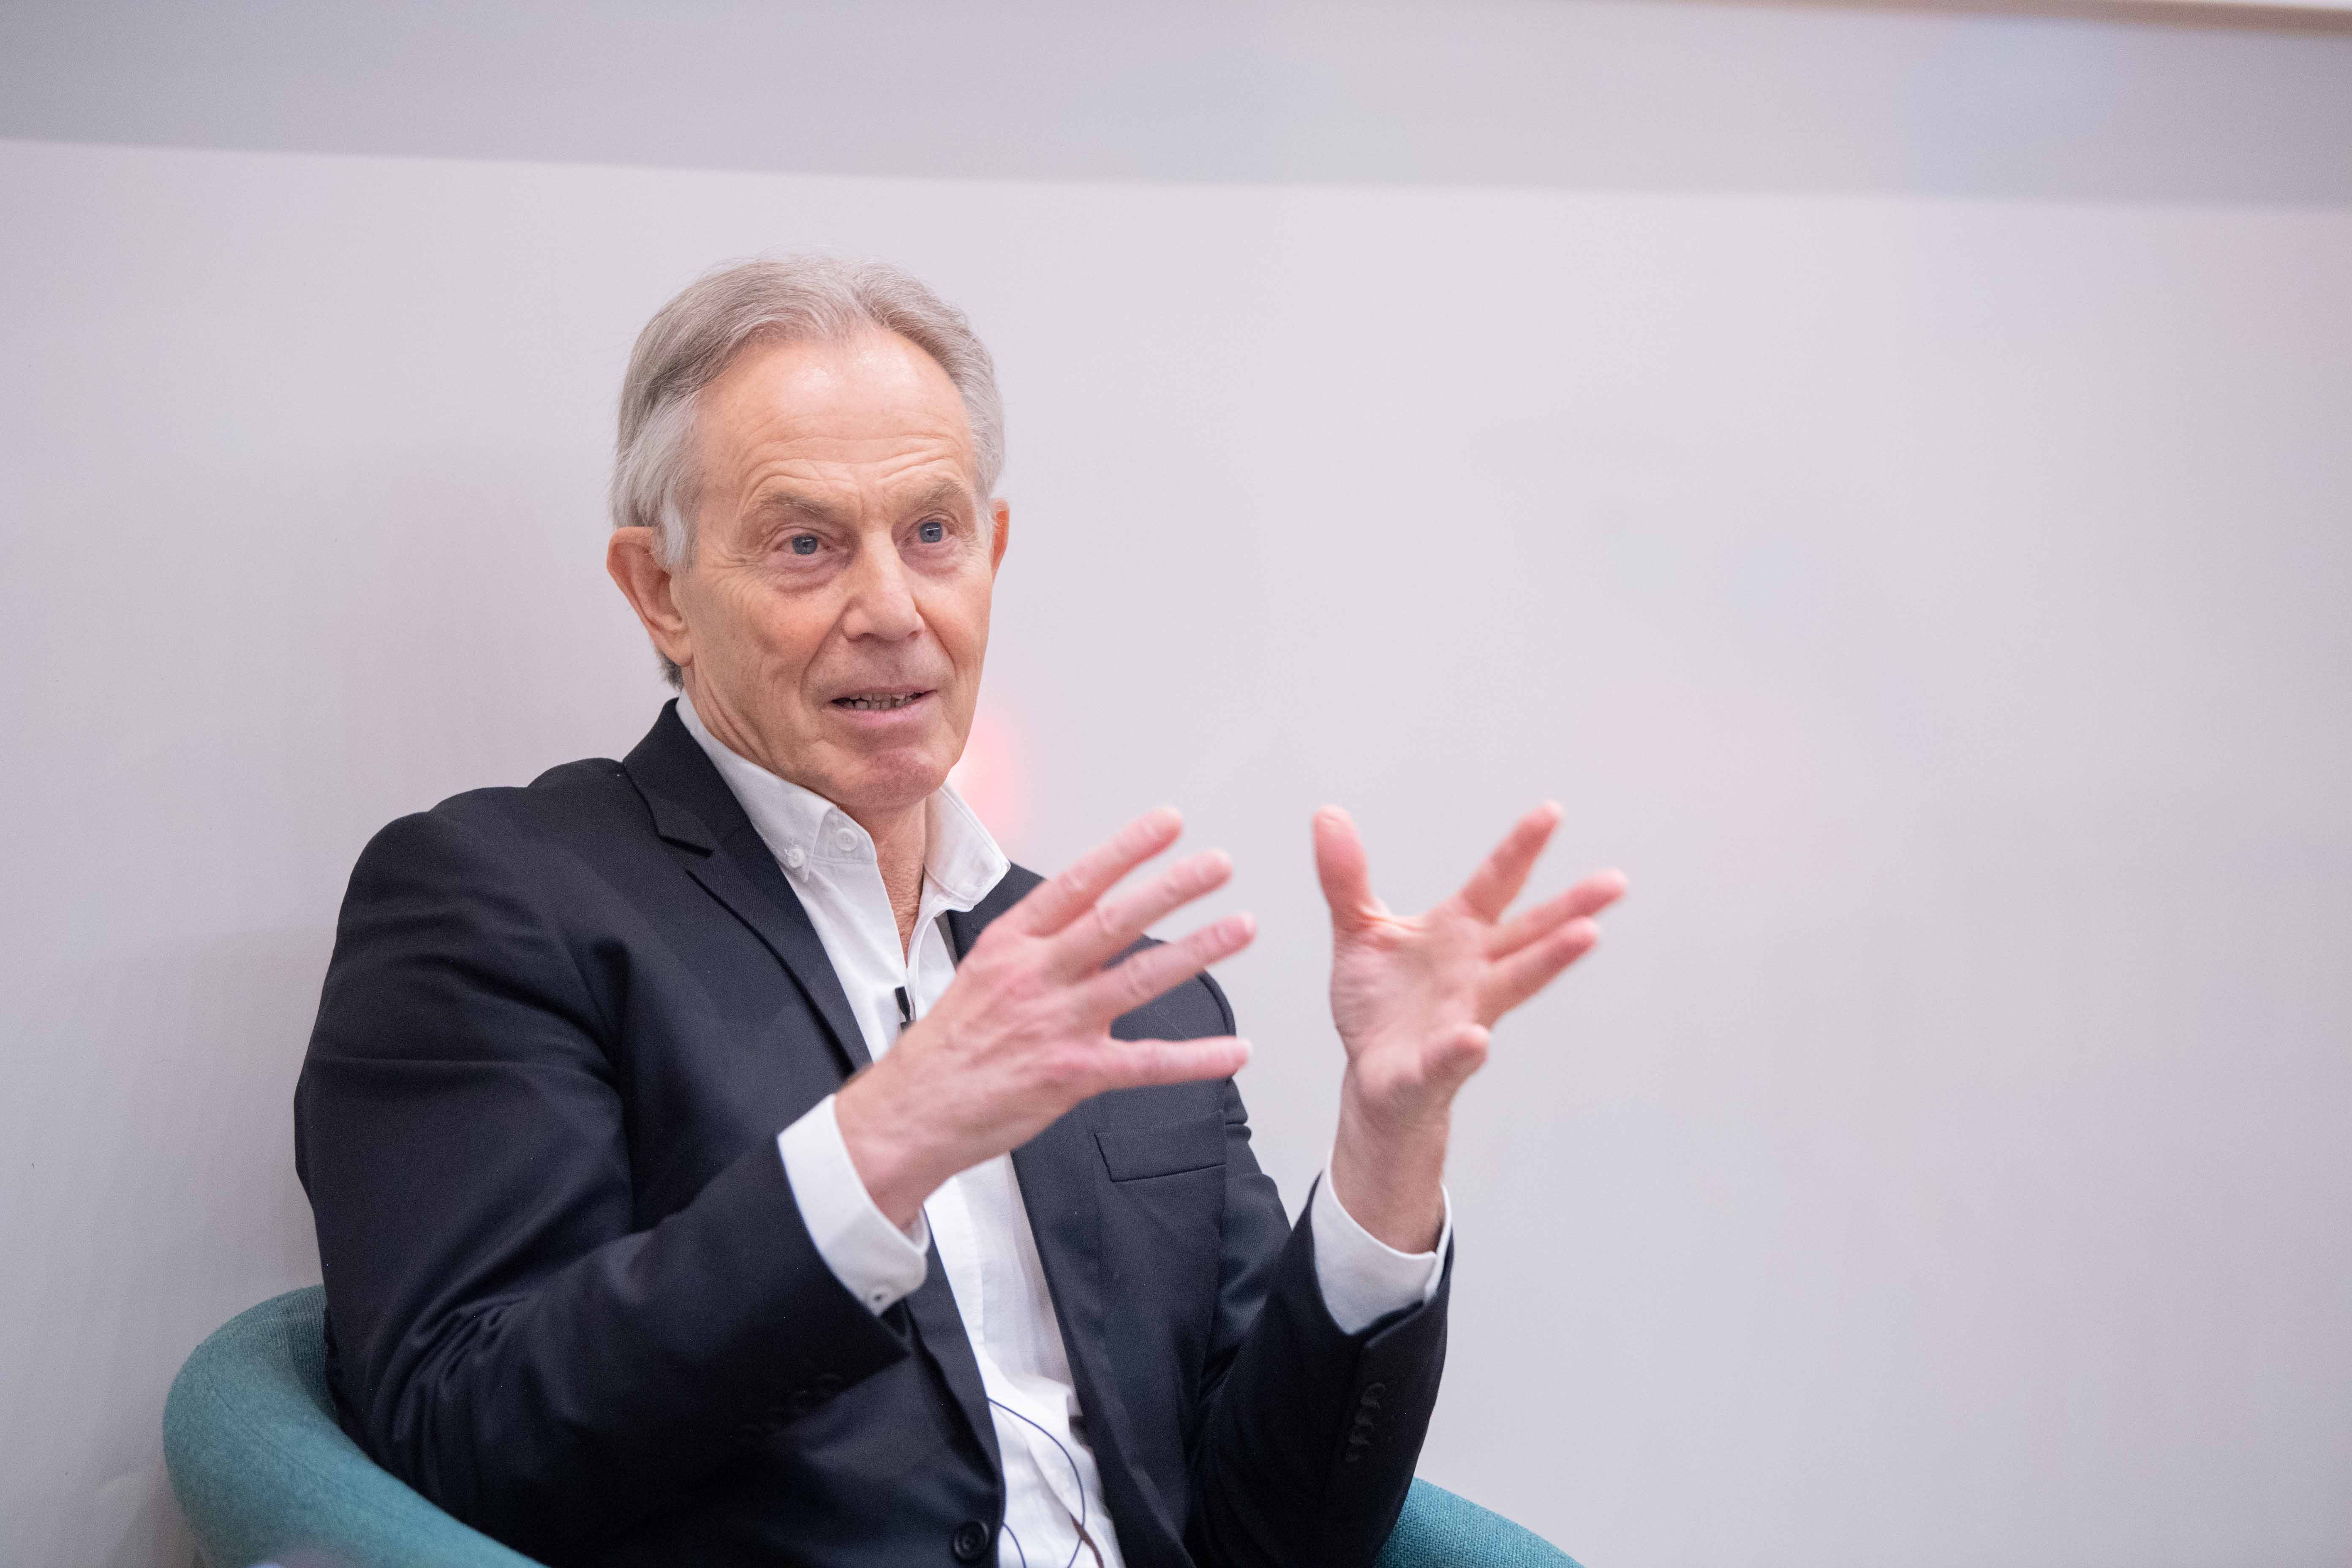 Tony Blair: ‘After I left people went back to the traditional roots of Labour, which I think was – and is – a mistake’